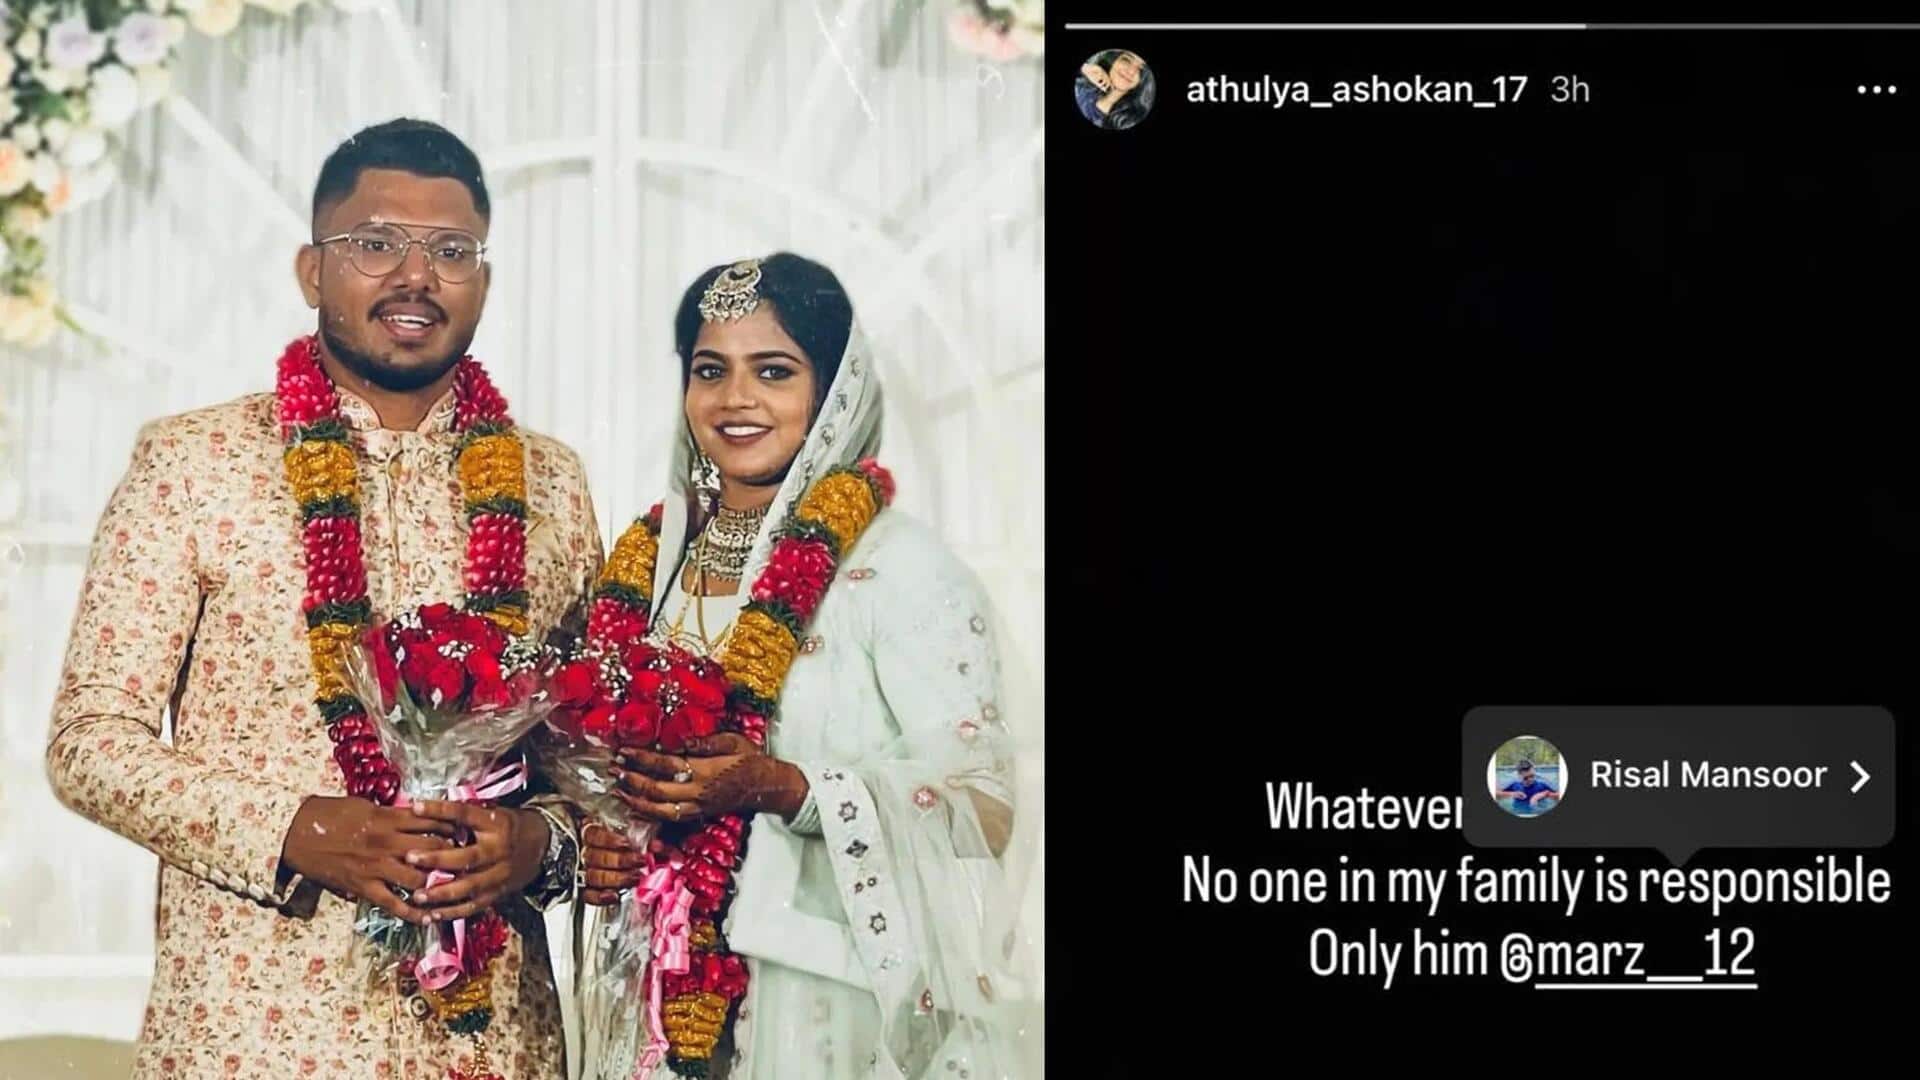 'Kerala Story'? Influencer shares worrying post after marrying Muslim man